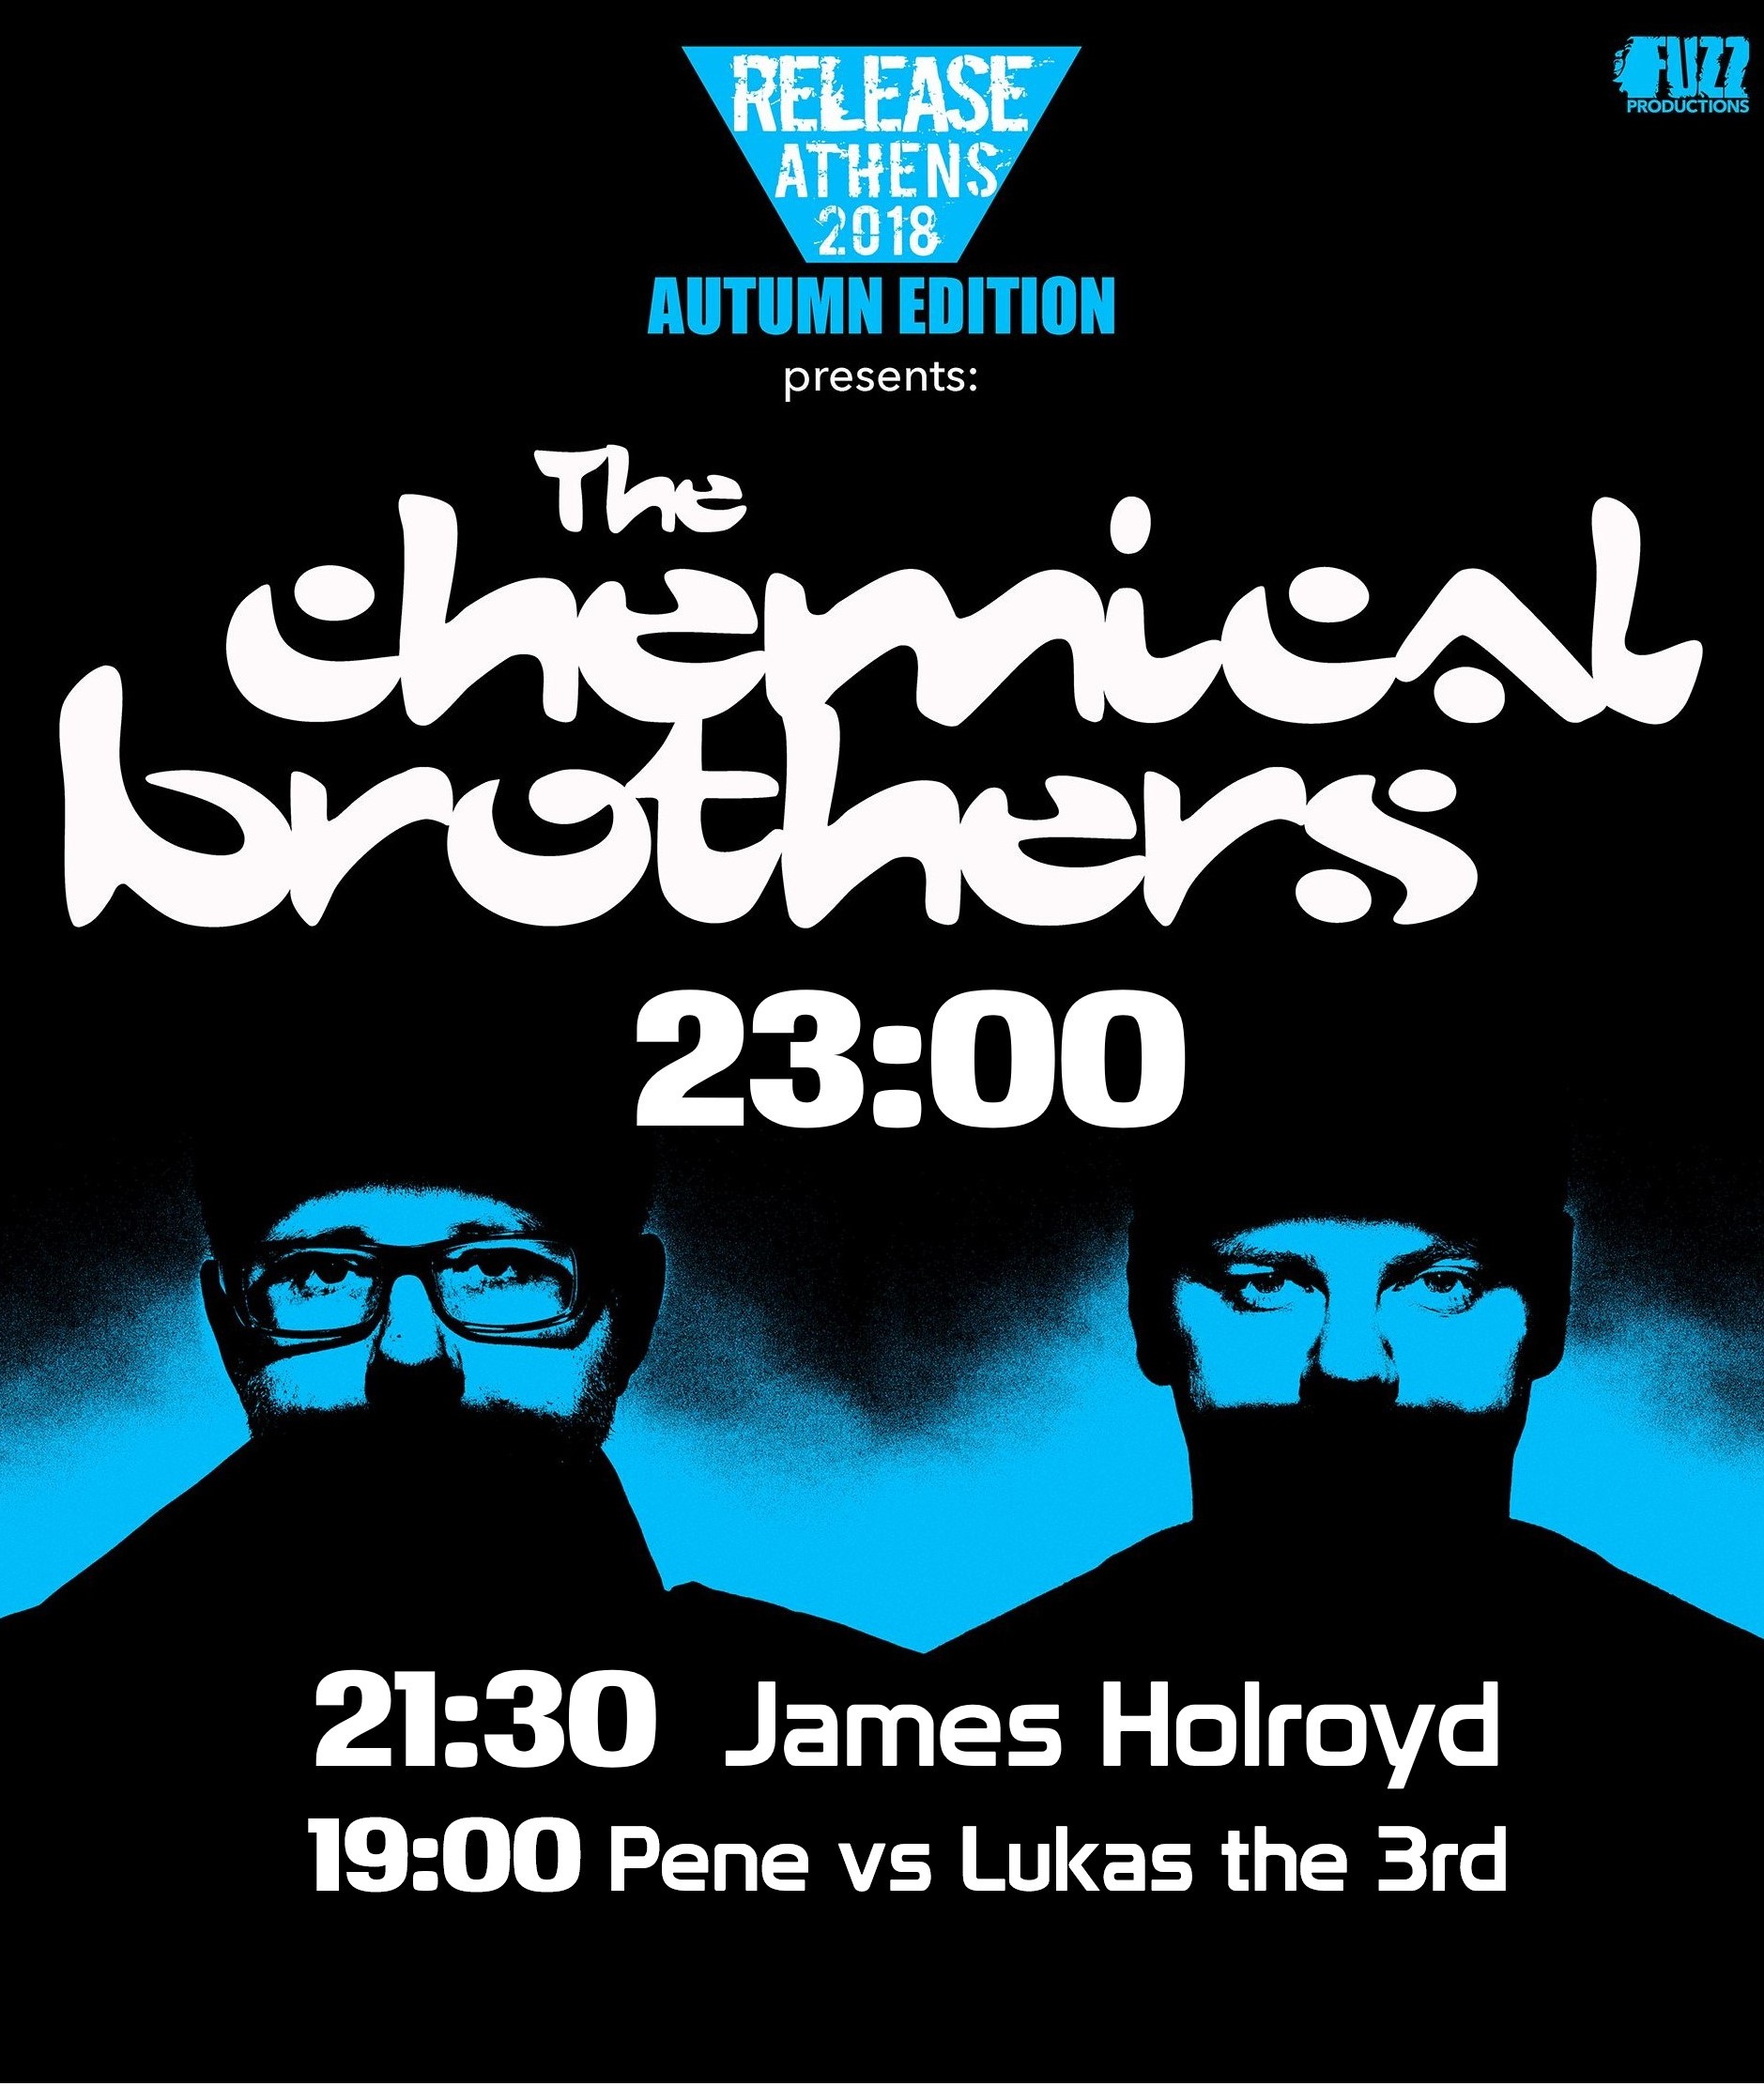 Release Athens Festival 2018- Autumn Edition Chemical Brothers programme